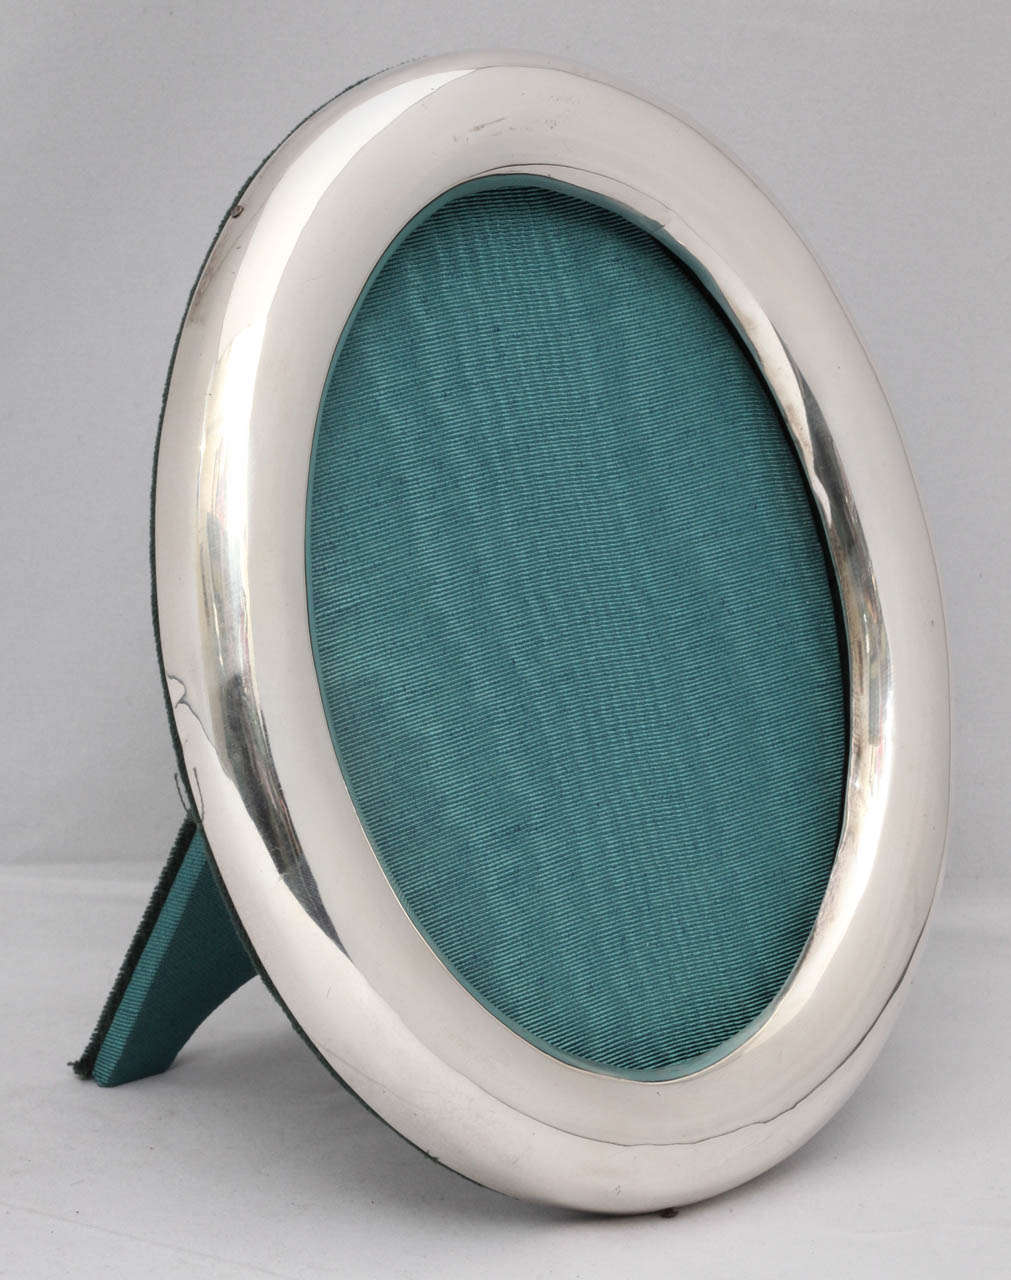 Sterling silver oval picture frame, Dominick & Haff, New York, circa 1900. Measures: 8